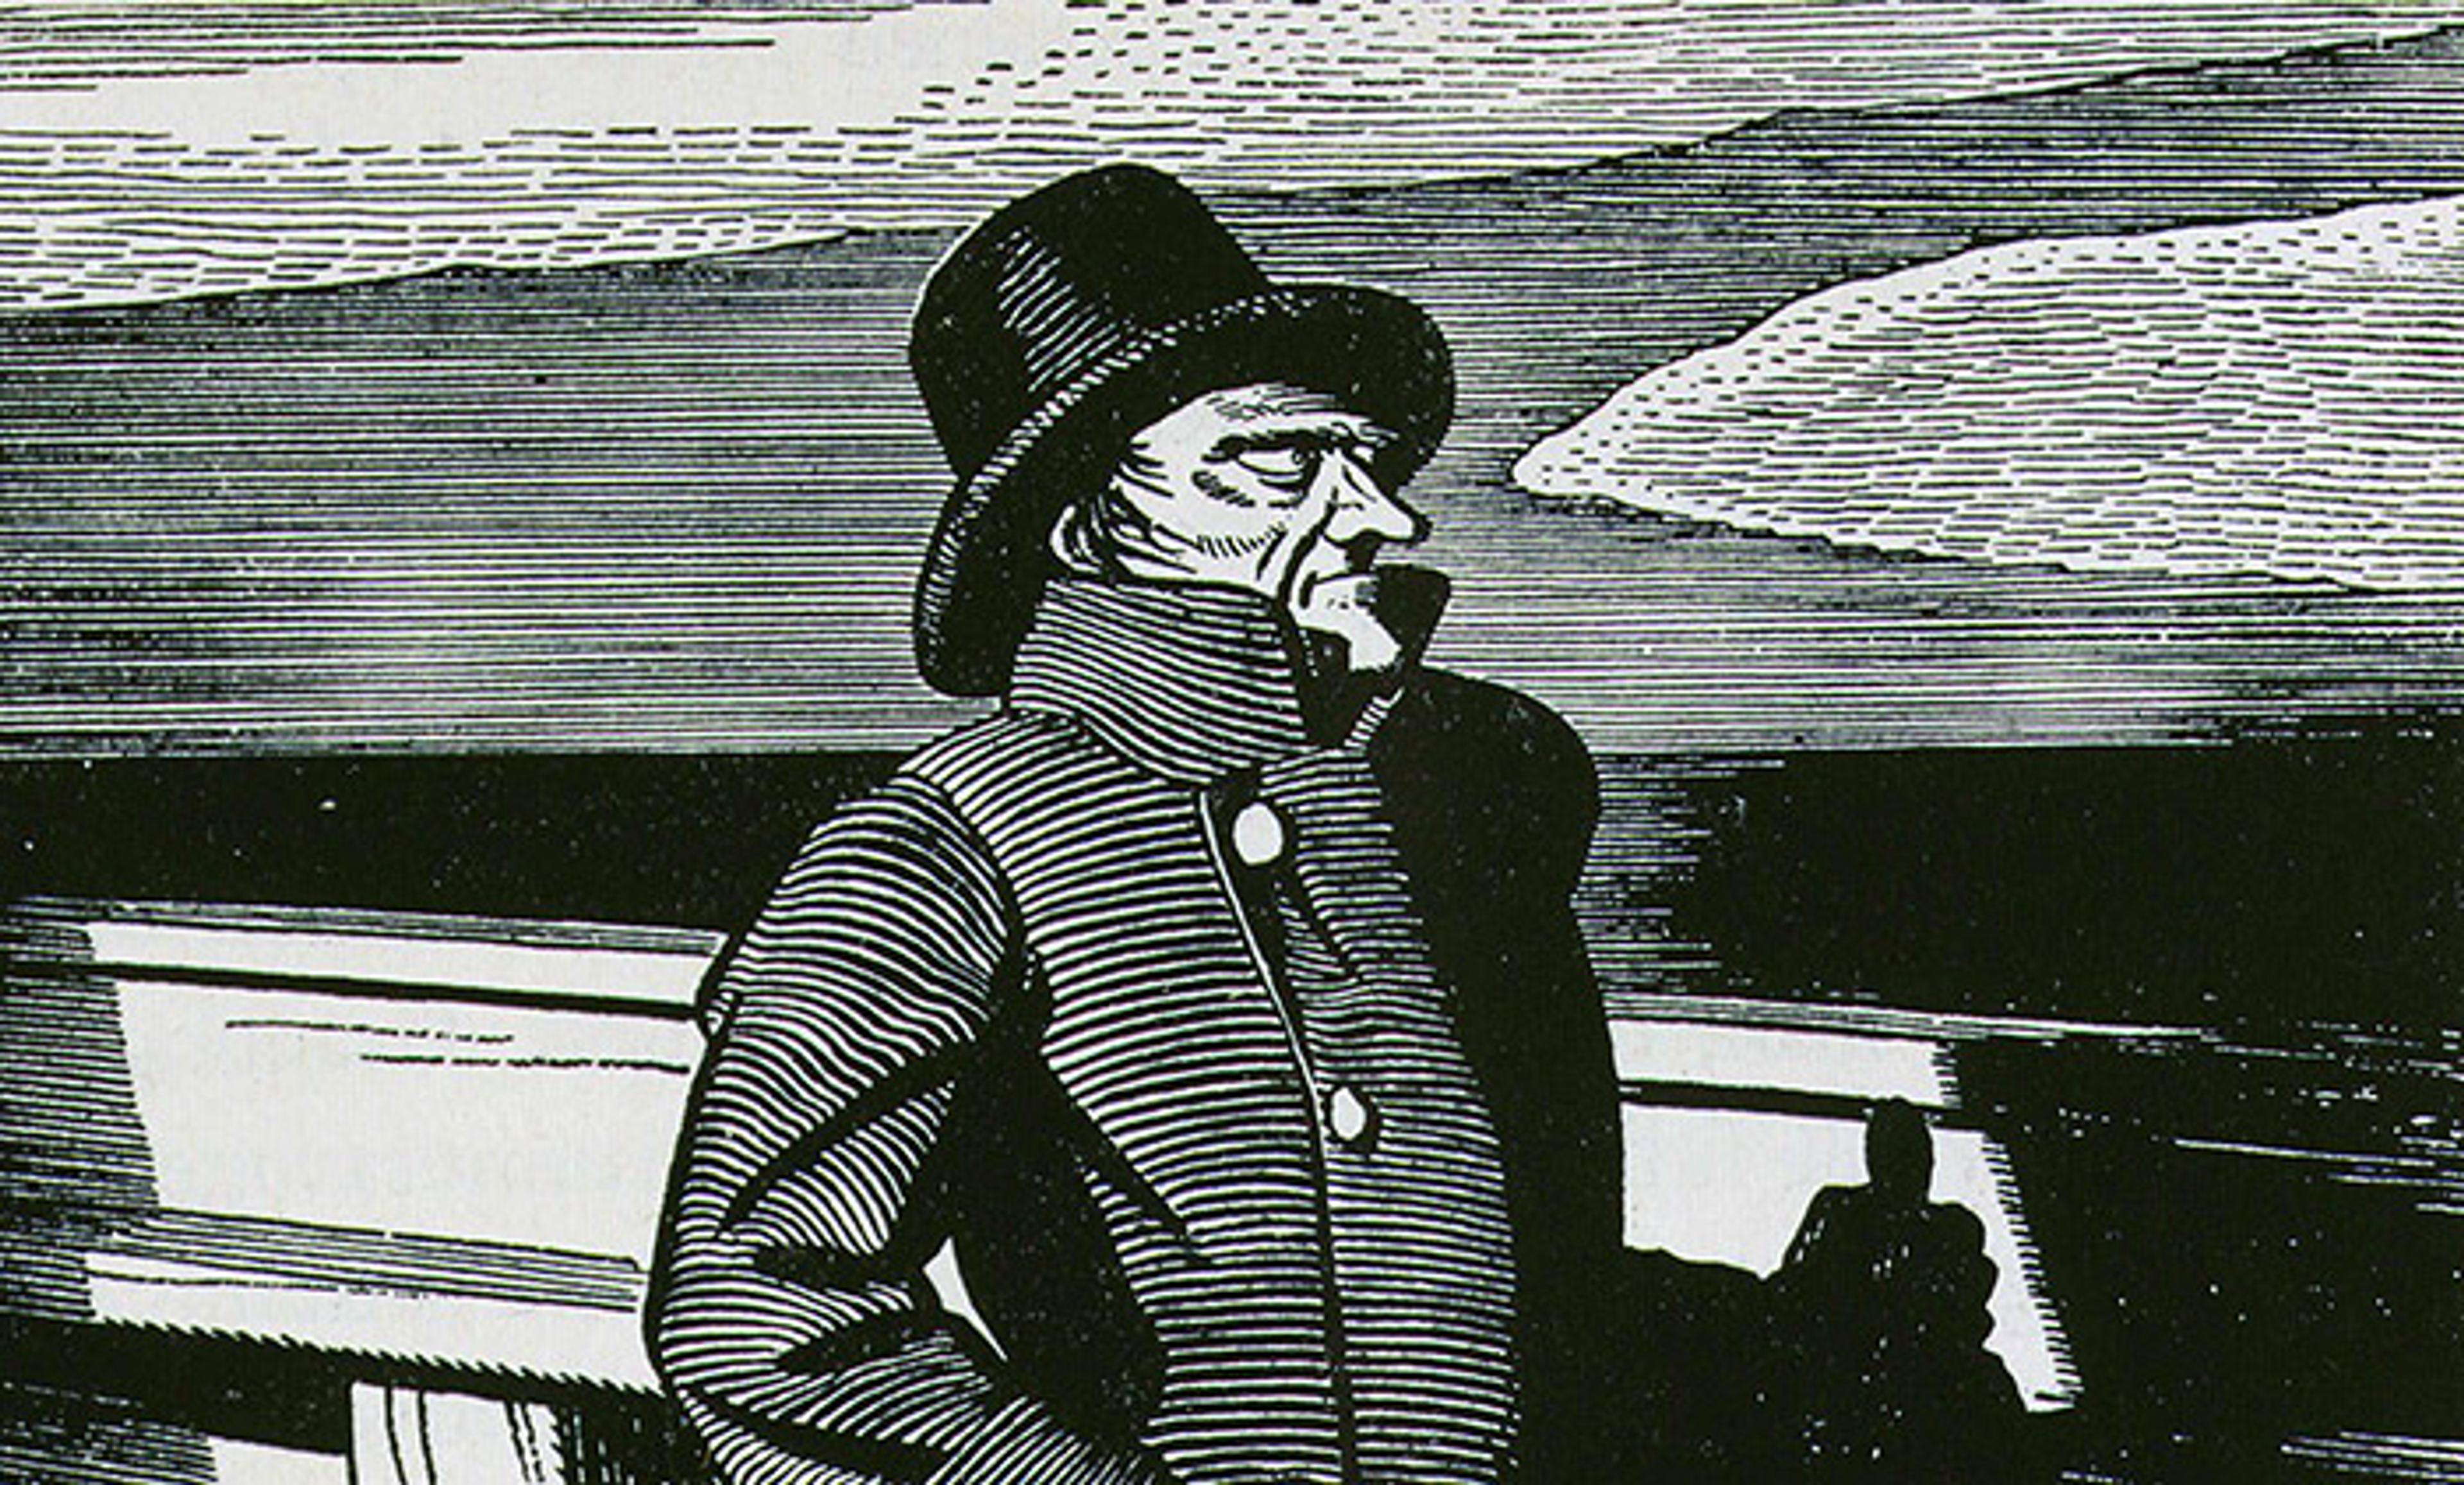 <p>Rockwell Kent’s illustration of Captain Ahab from the 1937 edition of Moby Dick. <em>Photo by Rex Features</em></p>